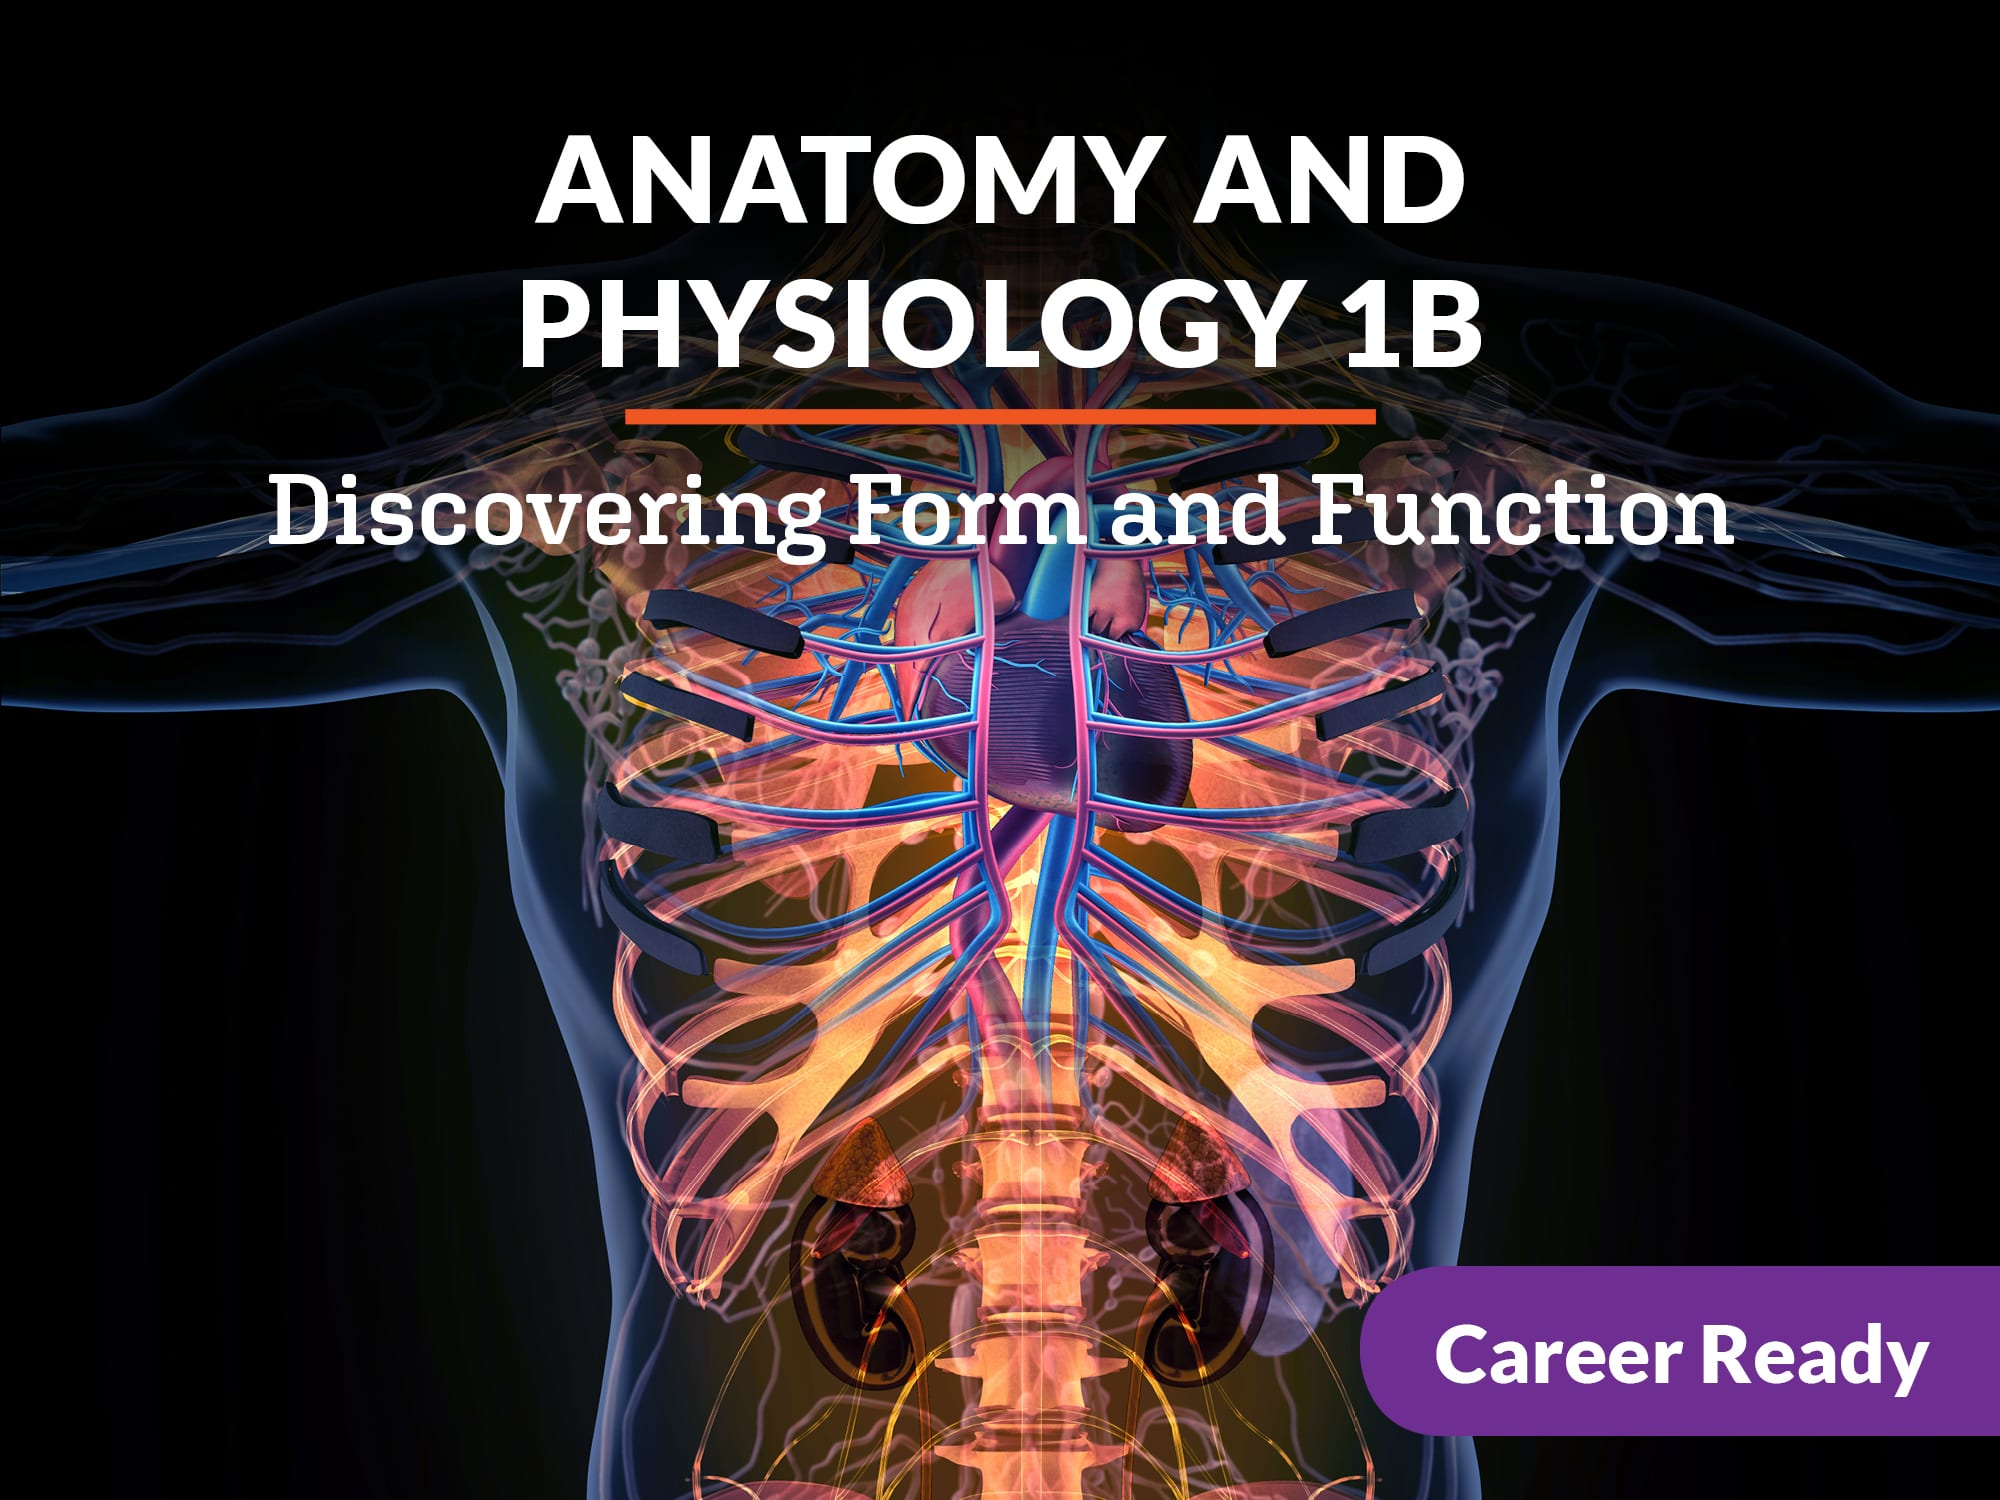 Anatomy and Physiology 1B Course